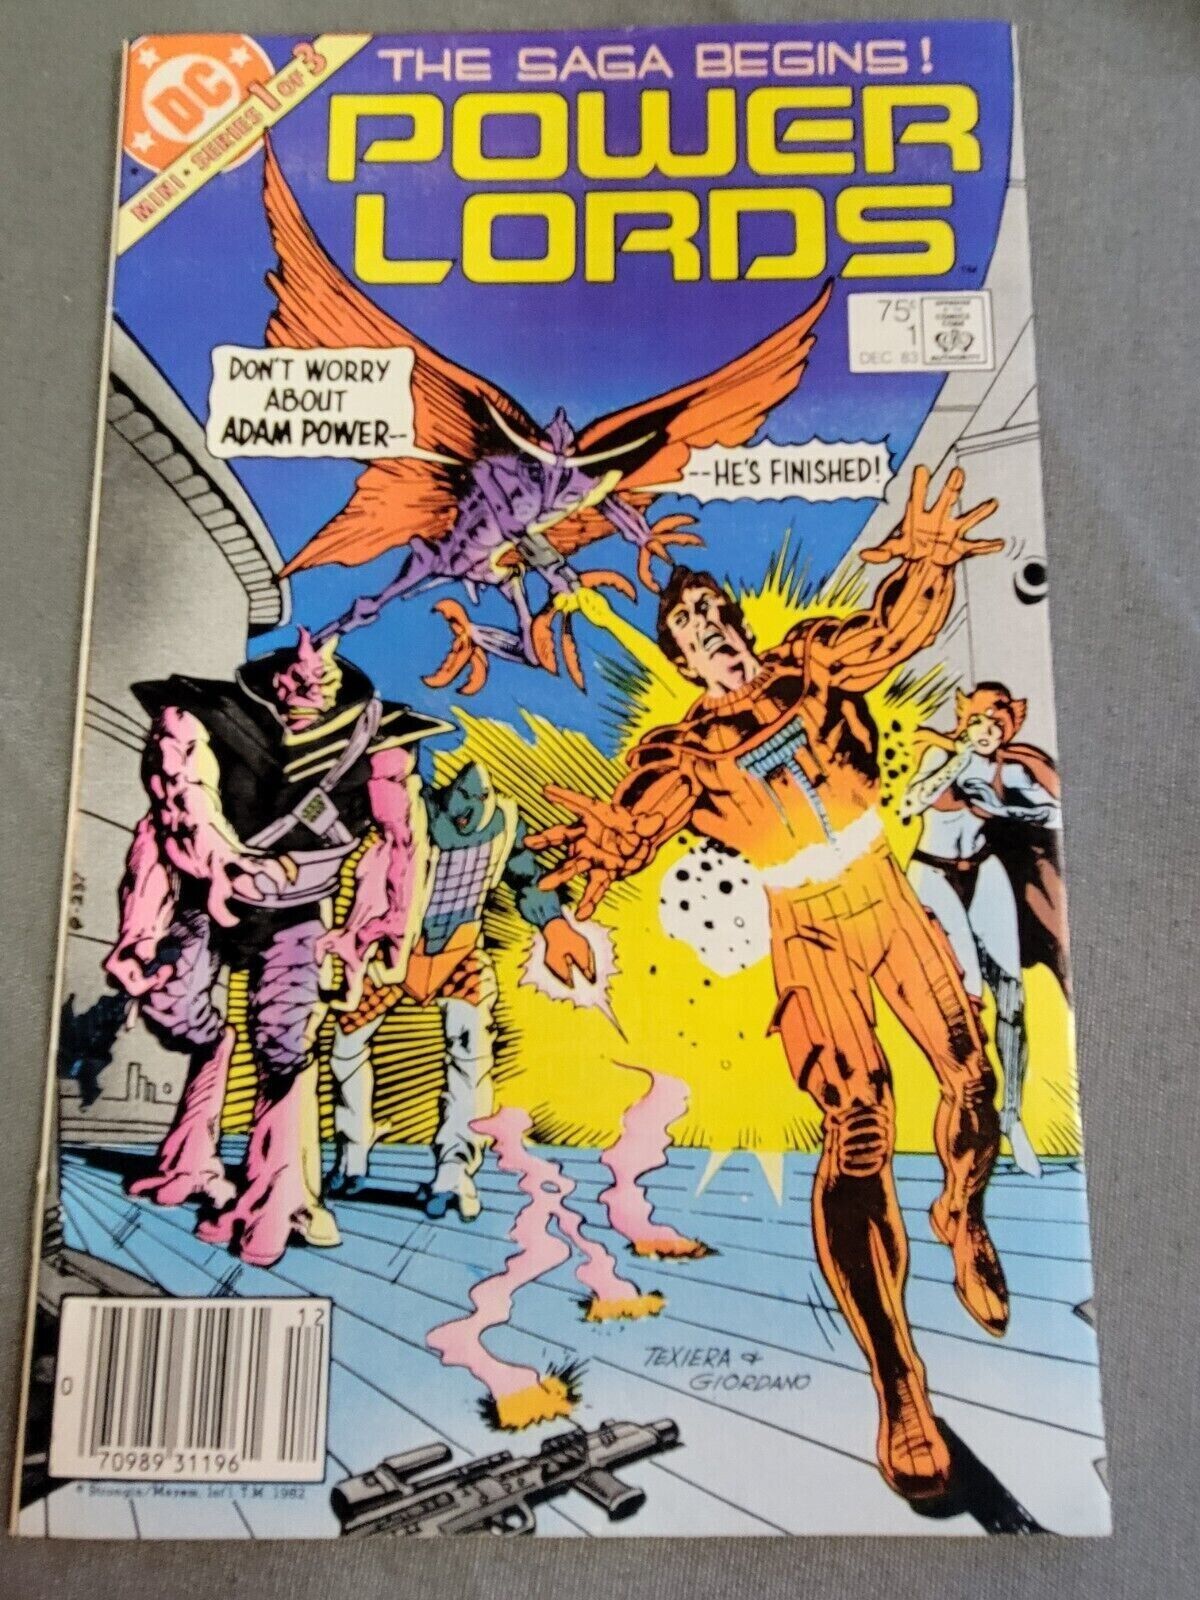 Power Lords #1, 2(Dec 1983, DC) Mini Series Based on the Toys from Revell